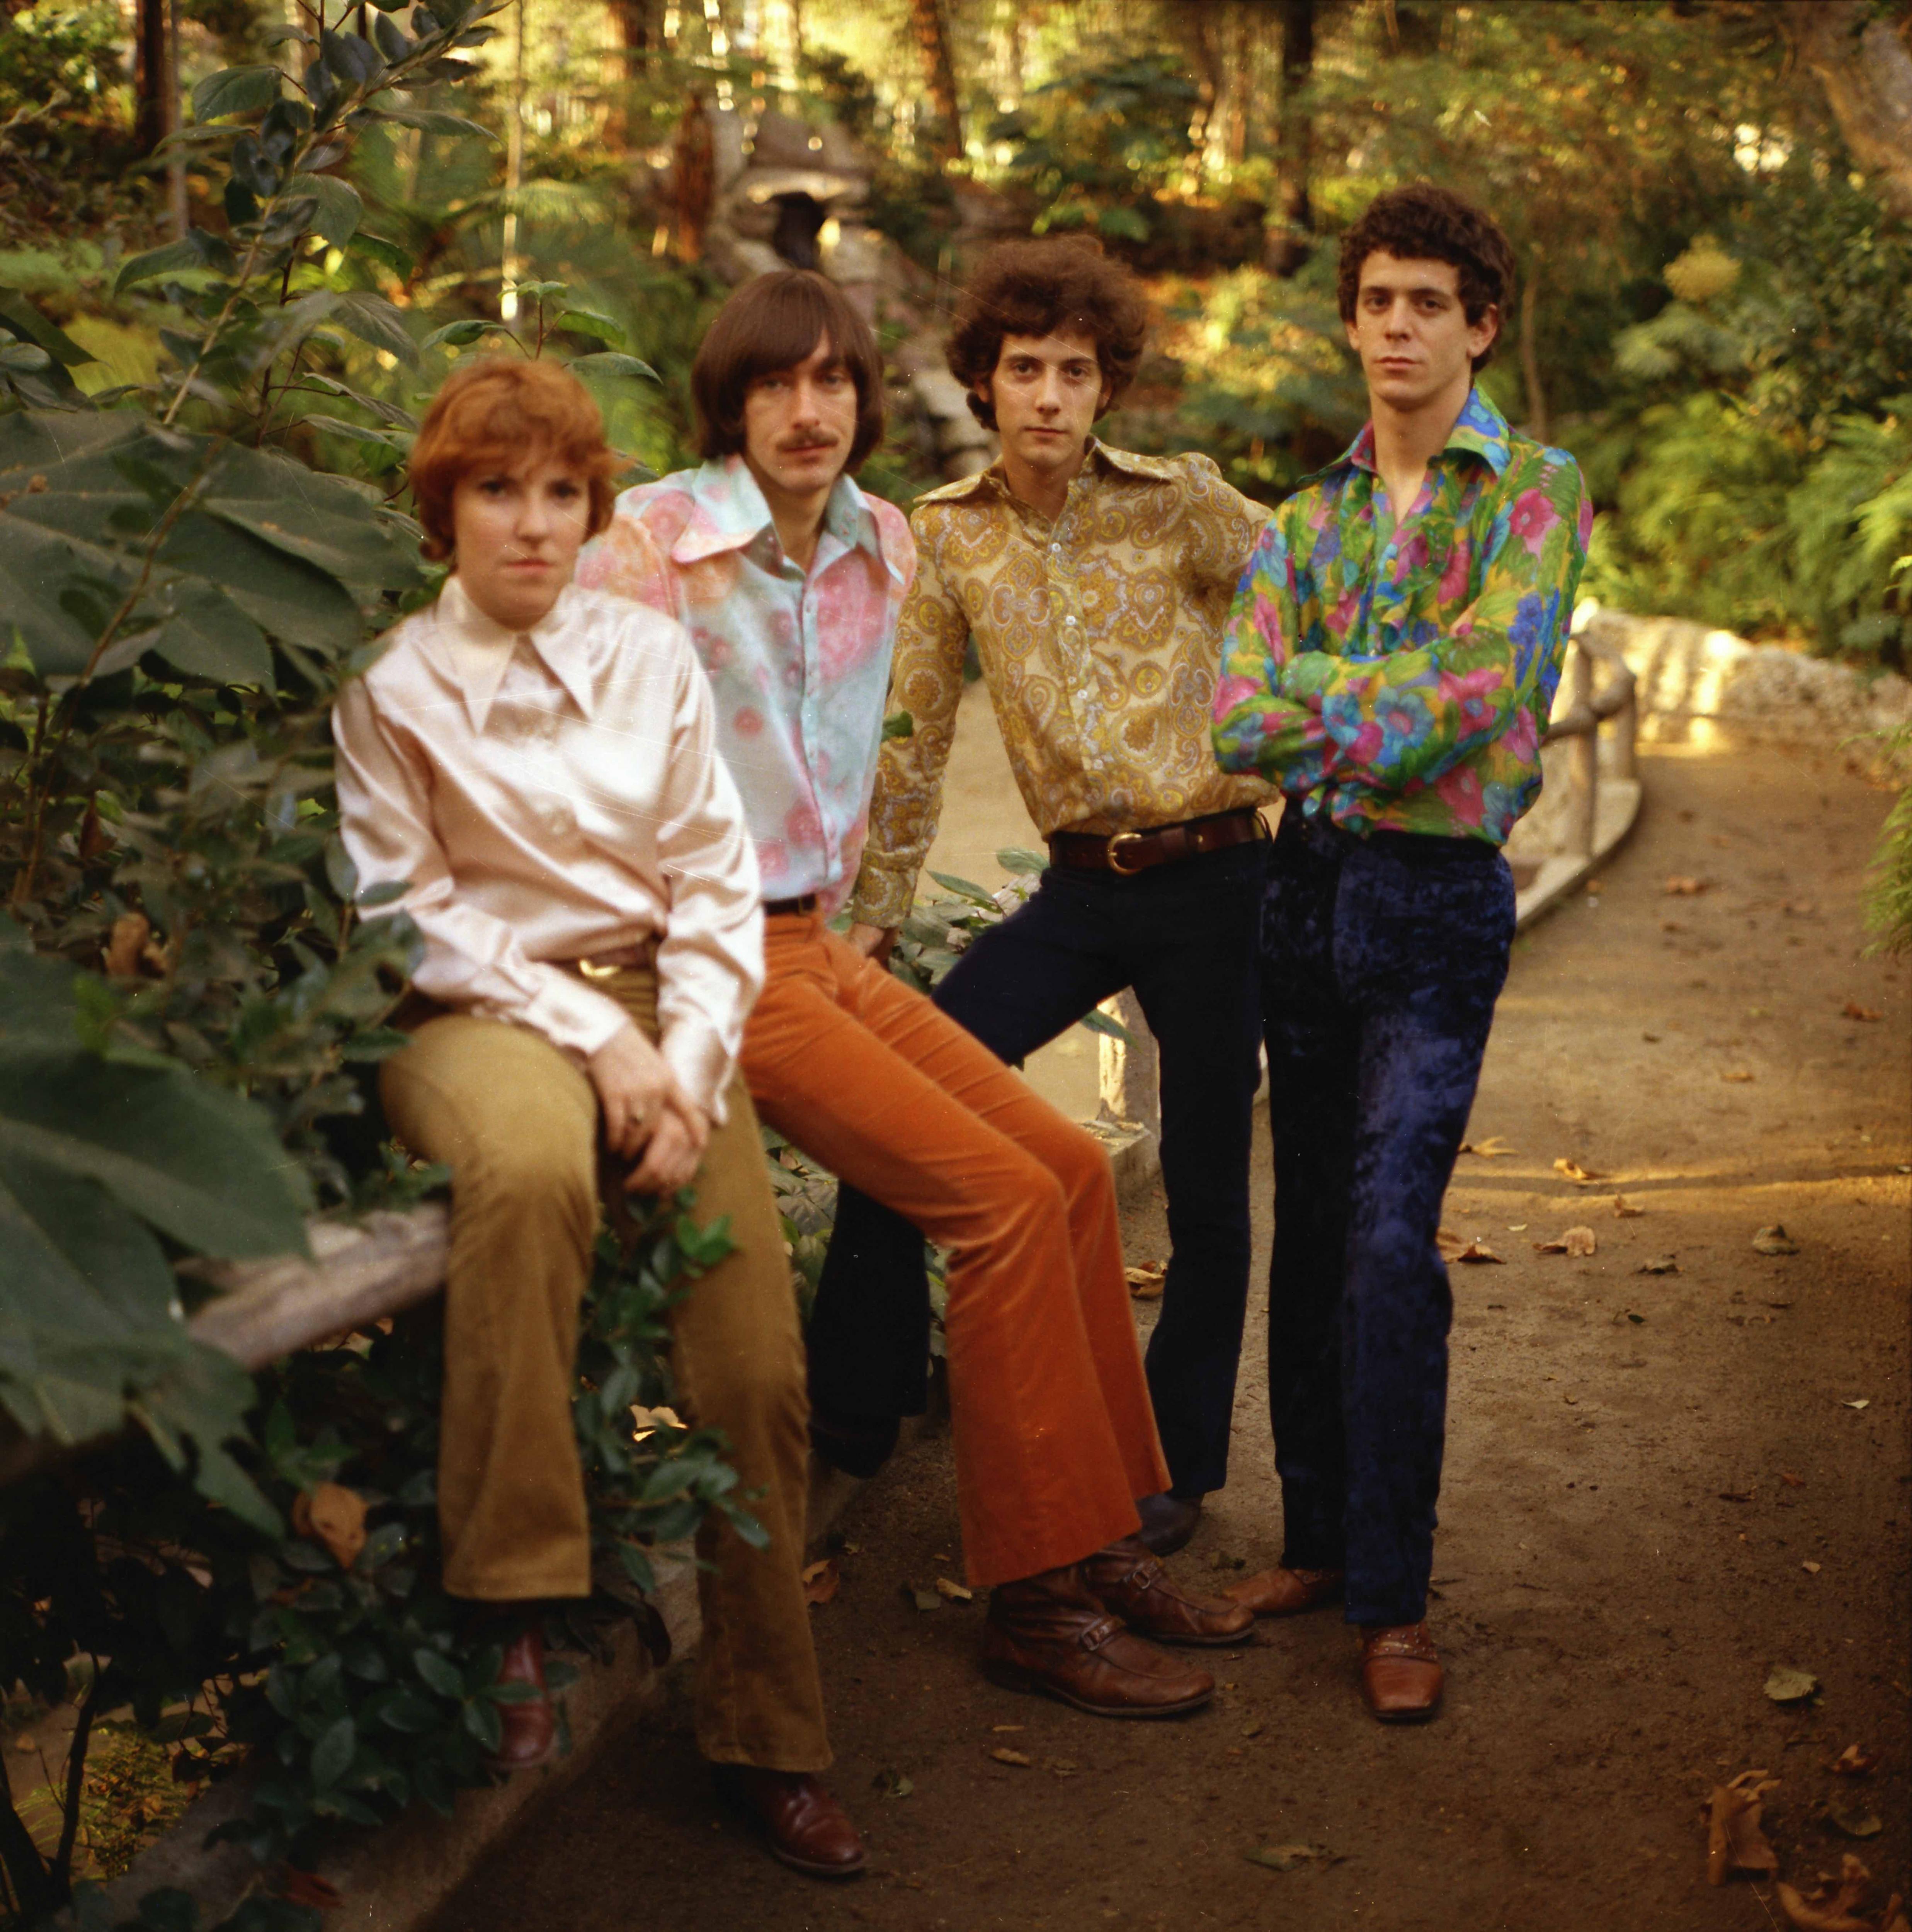 The Velvet Underground pose in a forest in colorful shirts